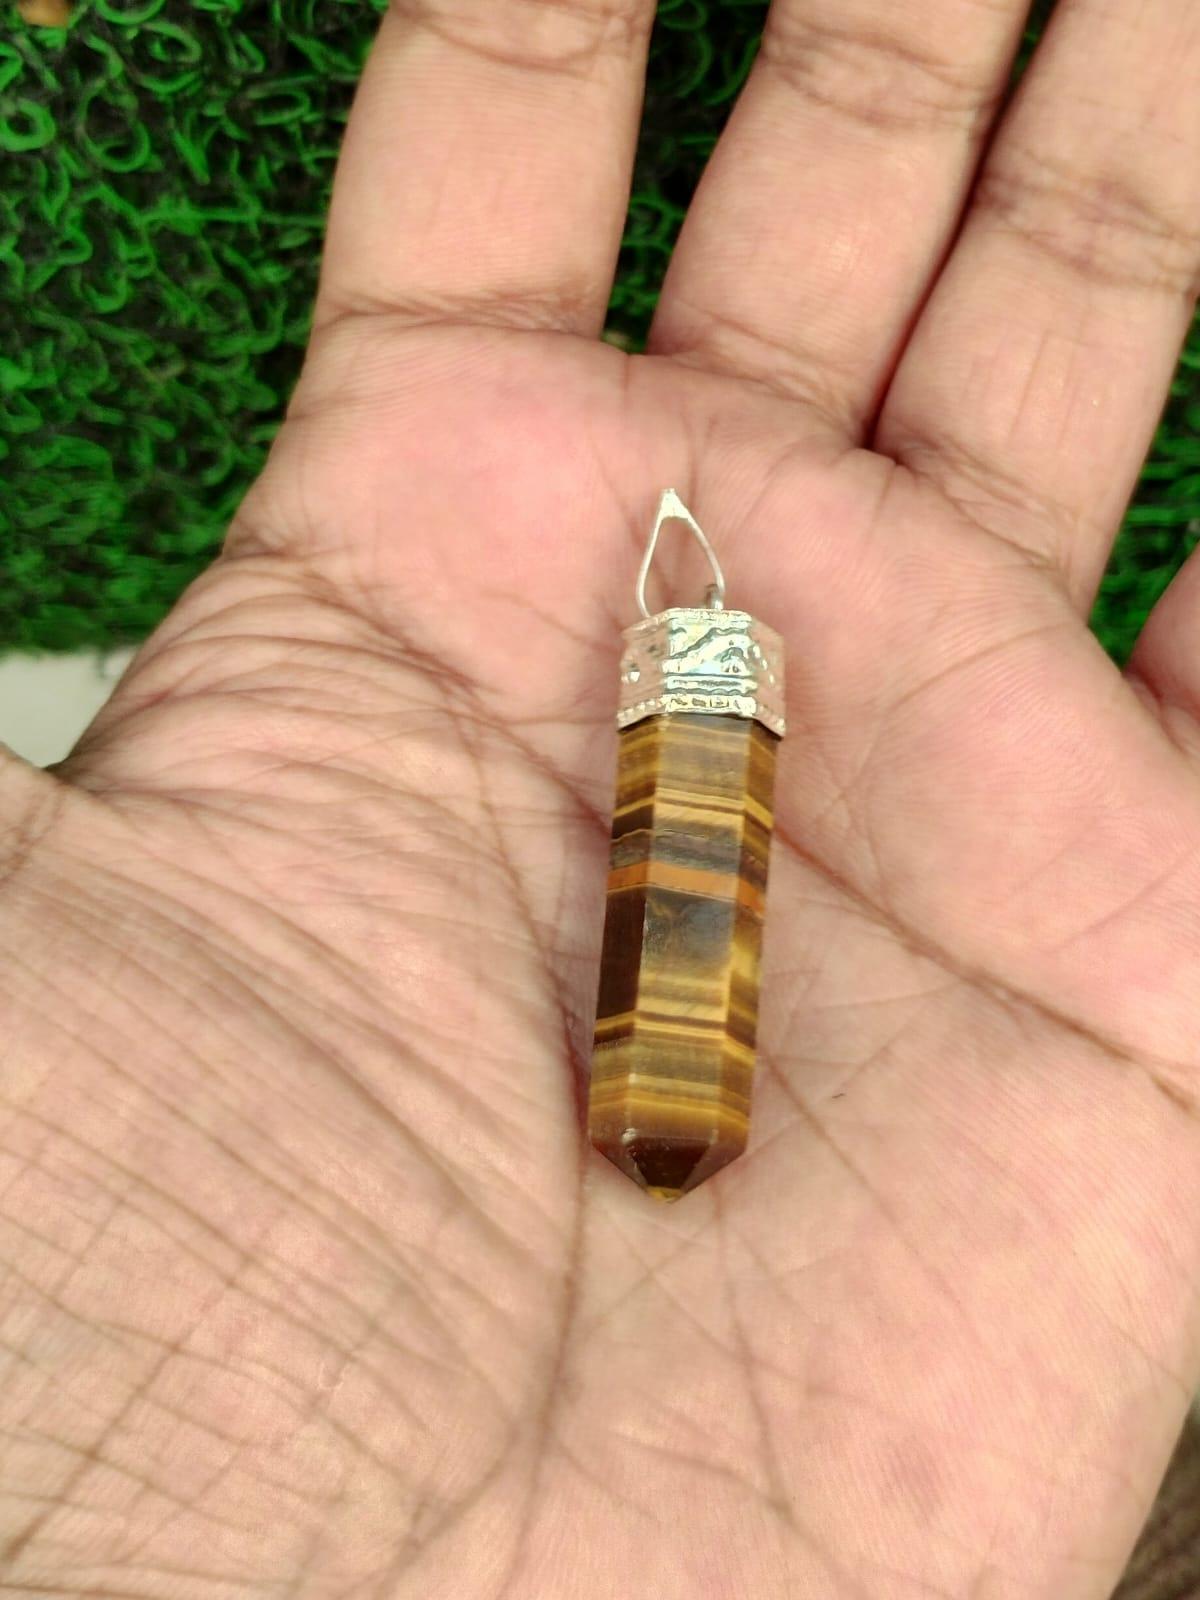 15 Benefits of Tiger Eye Stone, Meaning, Original Test, Types, How to Wear